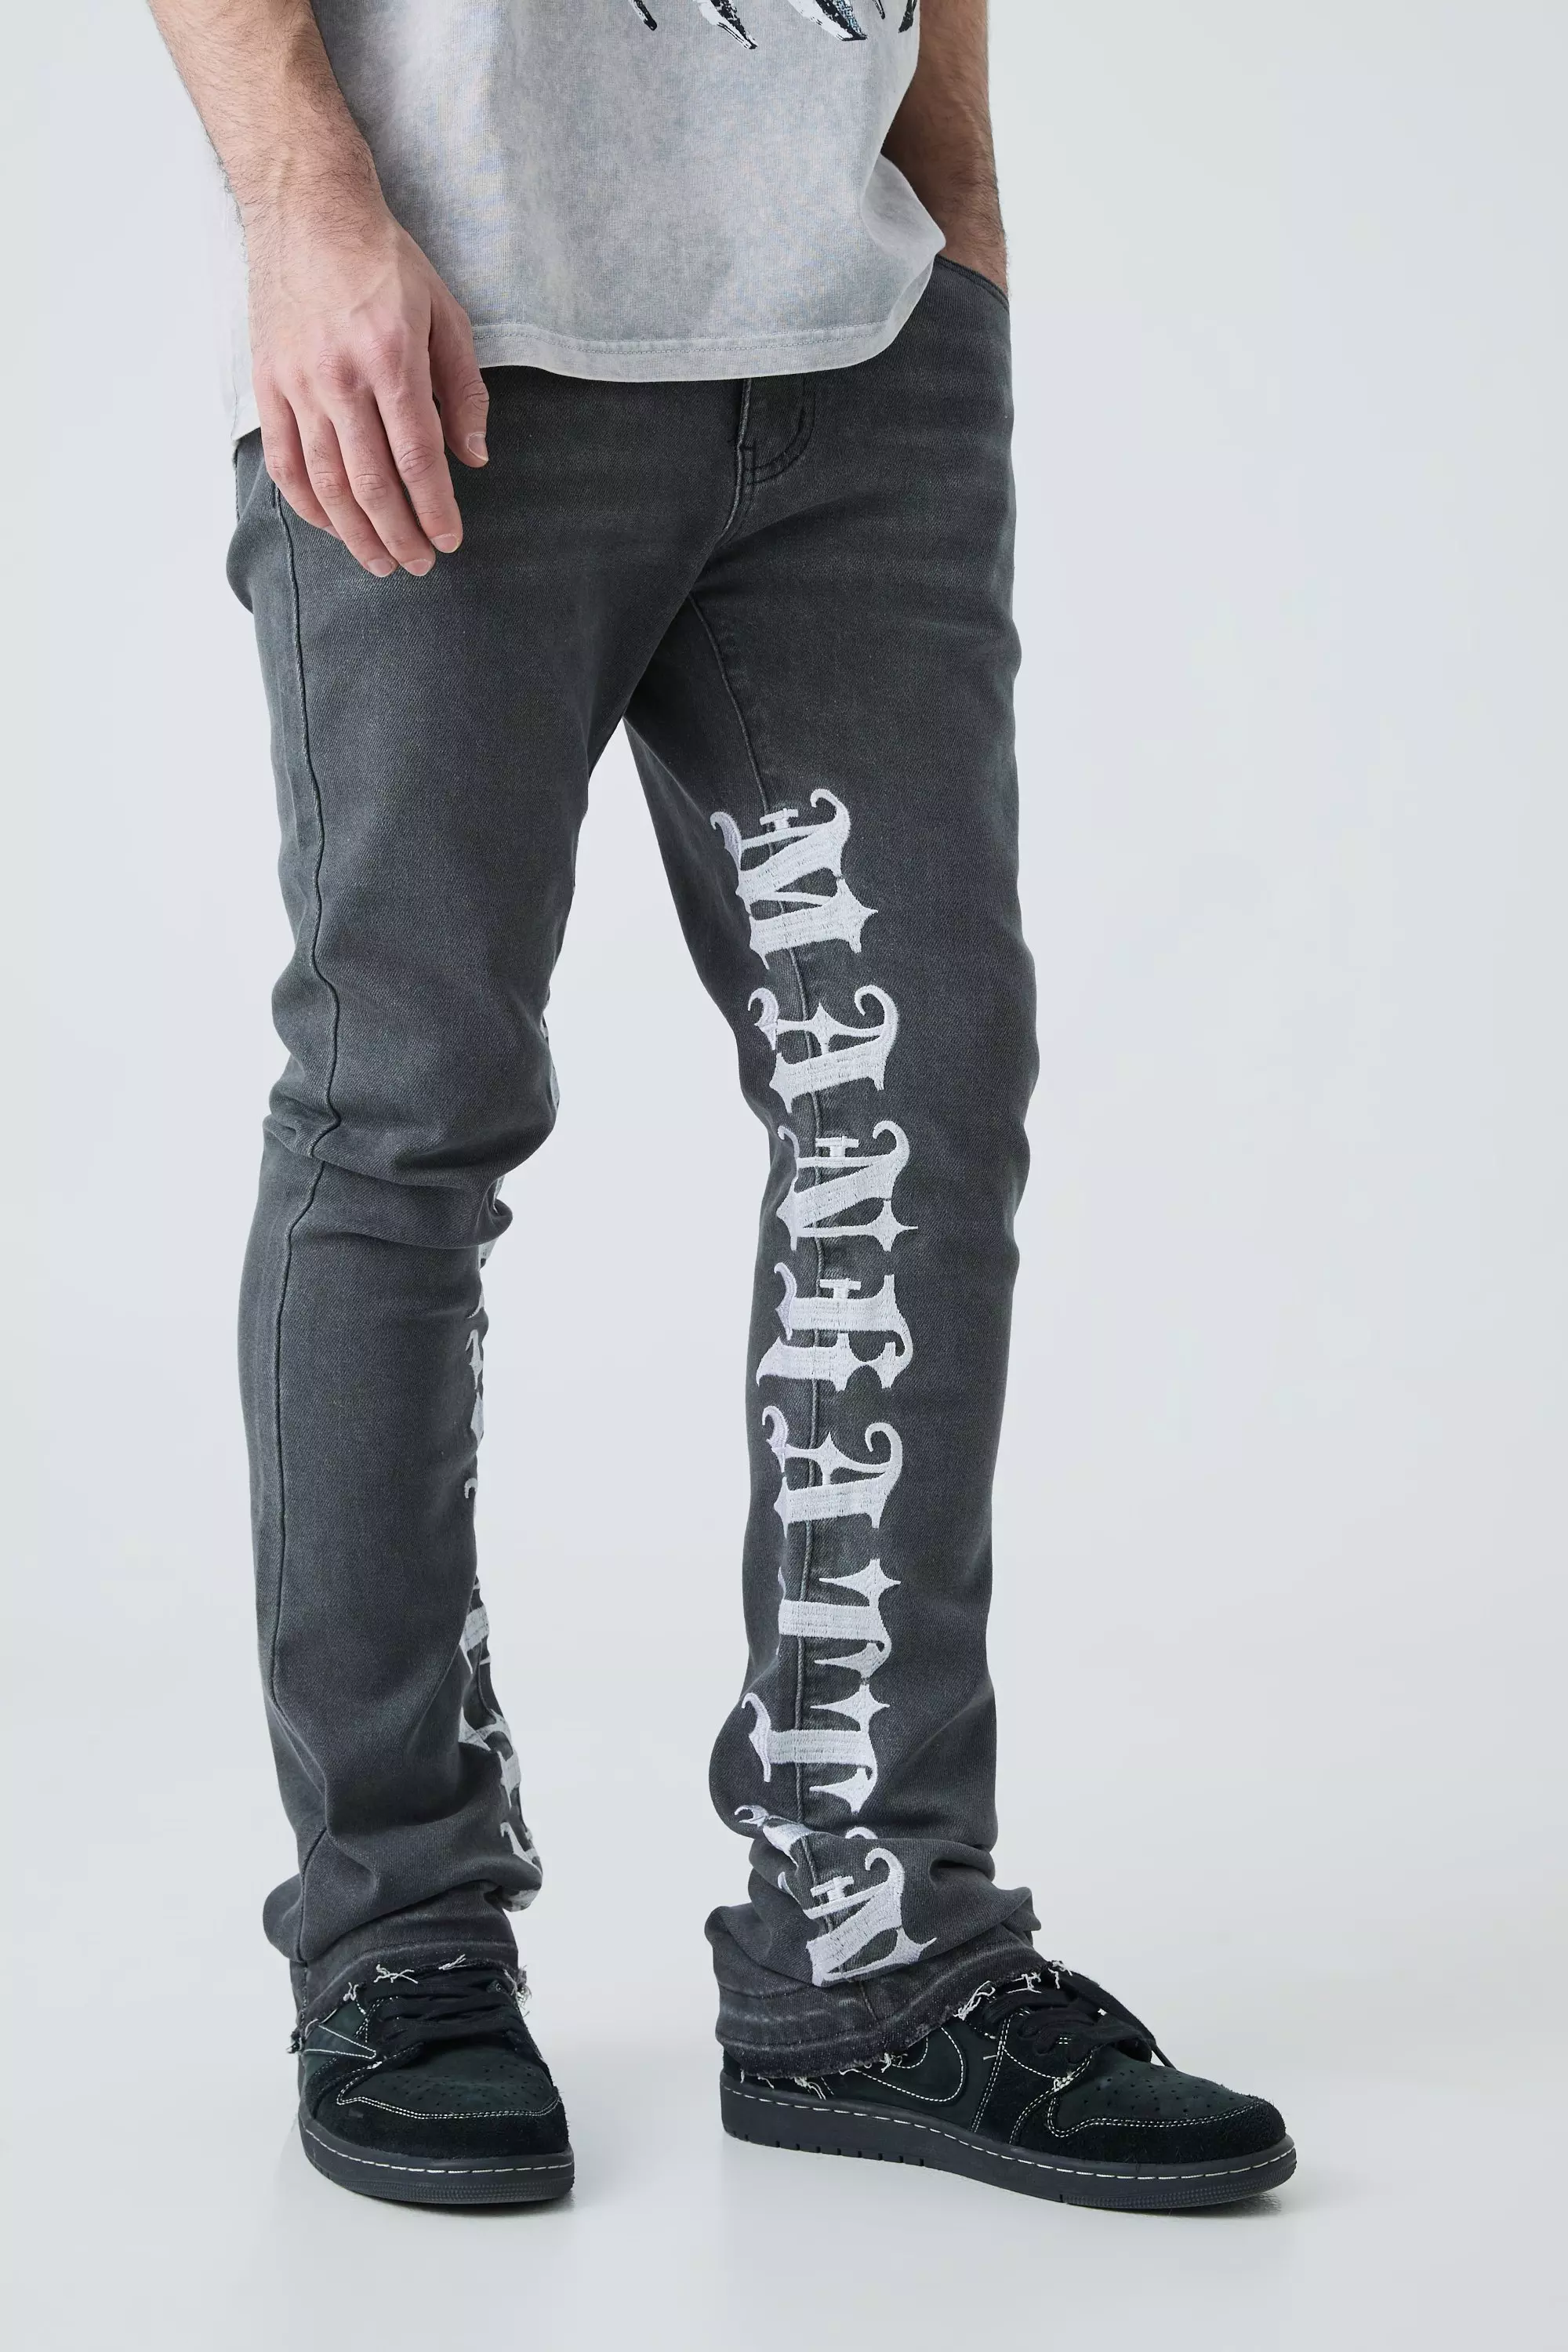 MULTI POCKET MID-RISE STACKED JEANS